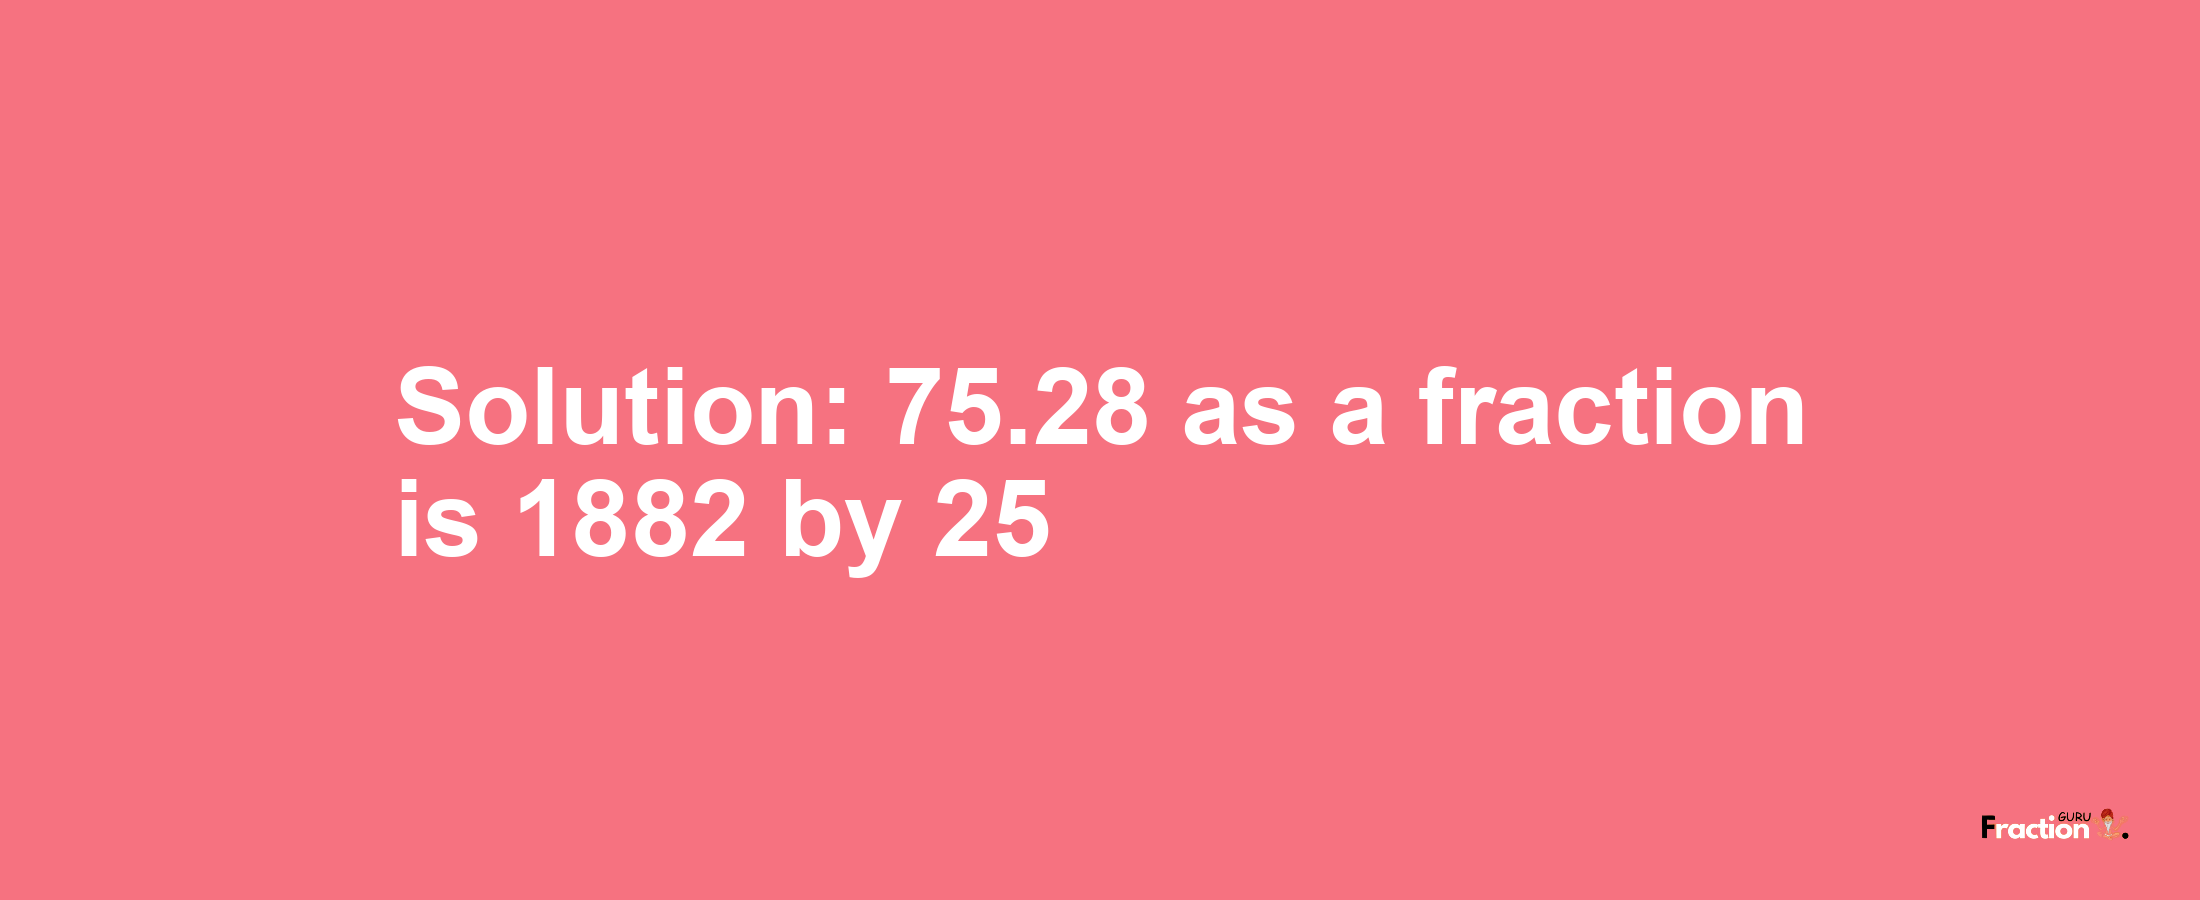 Solution:75.28 as a fraction is 1882/25